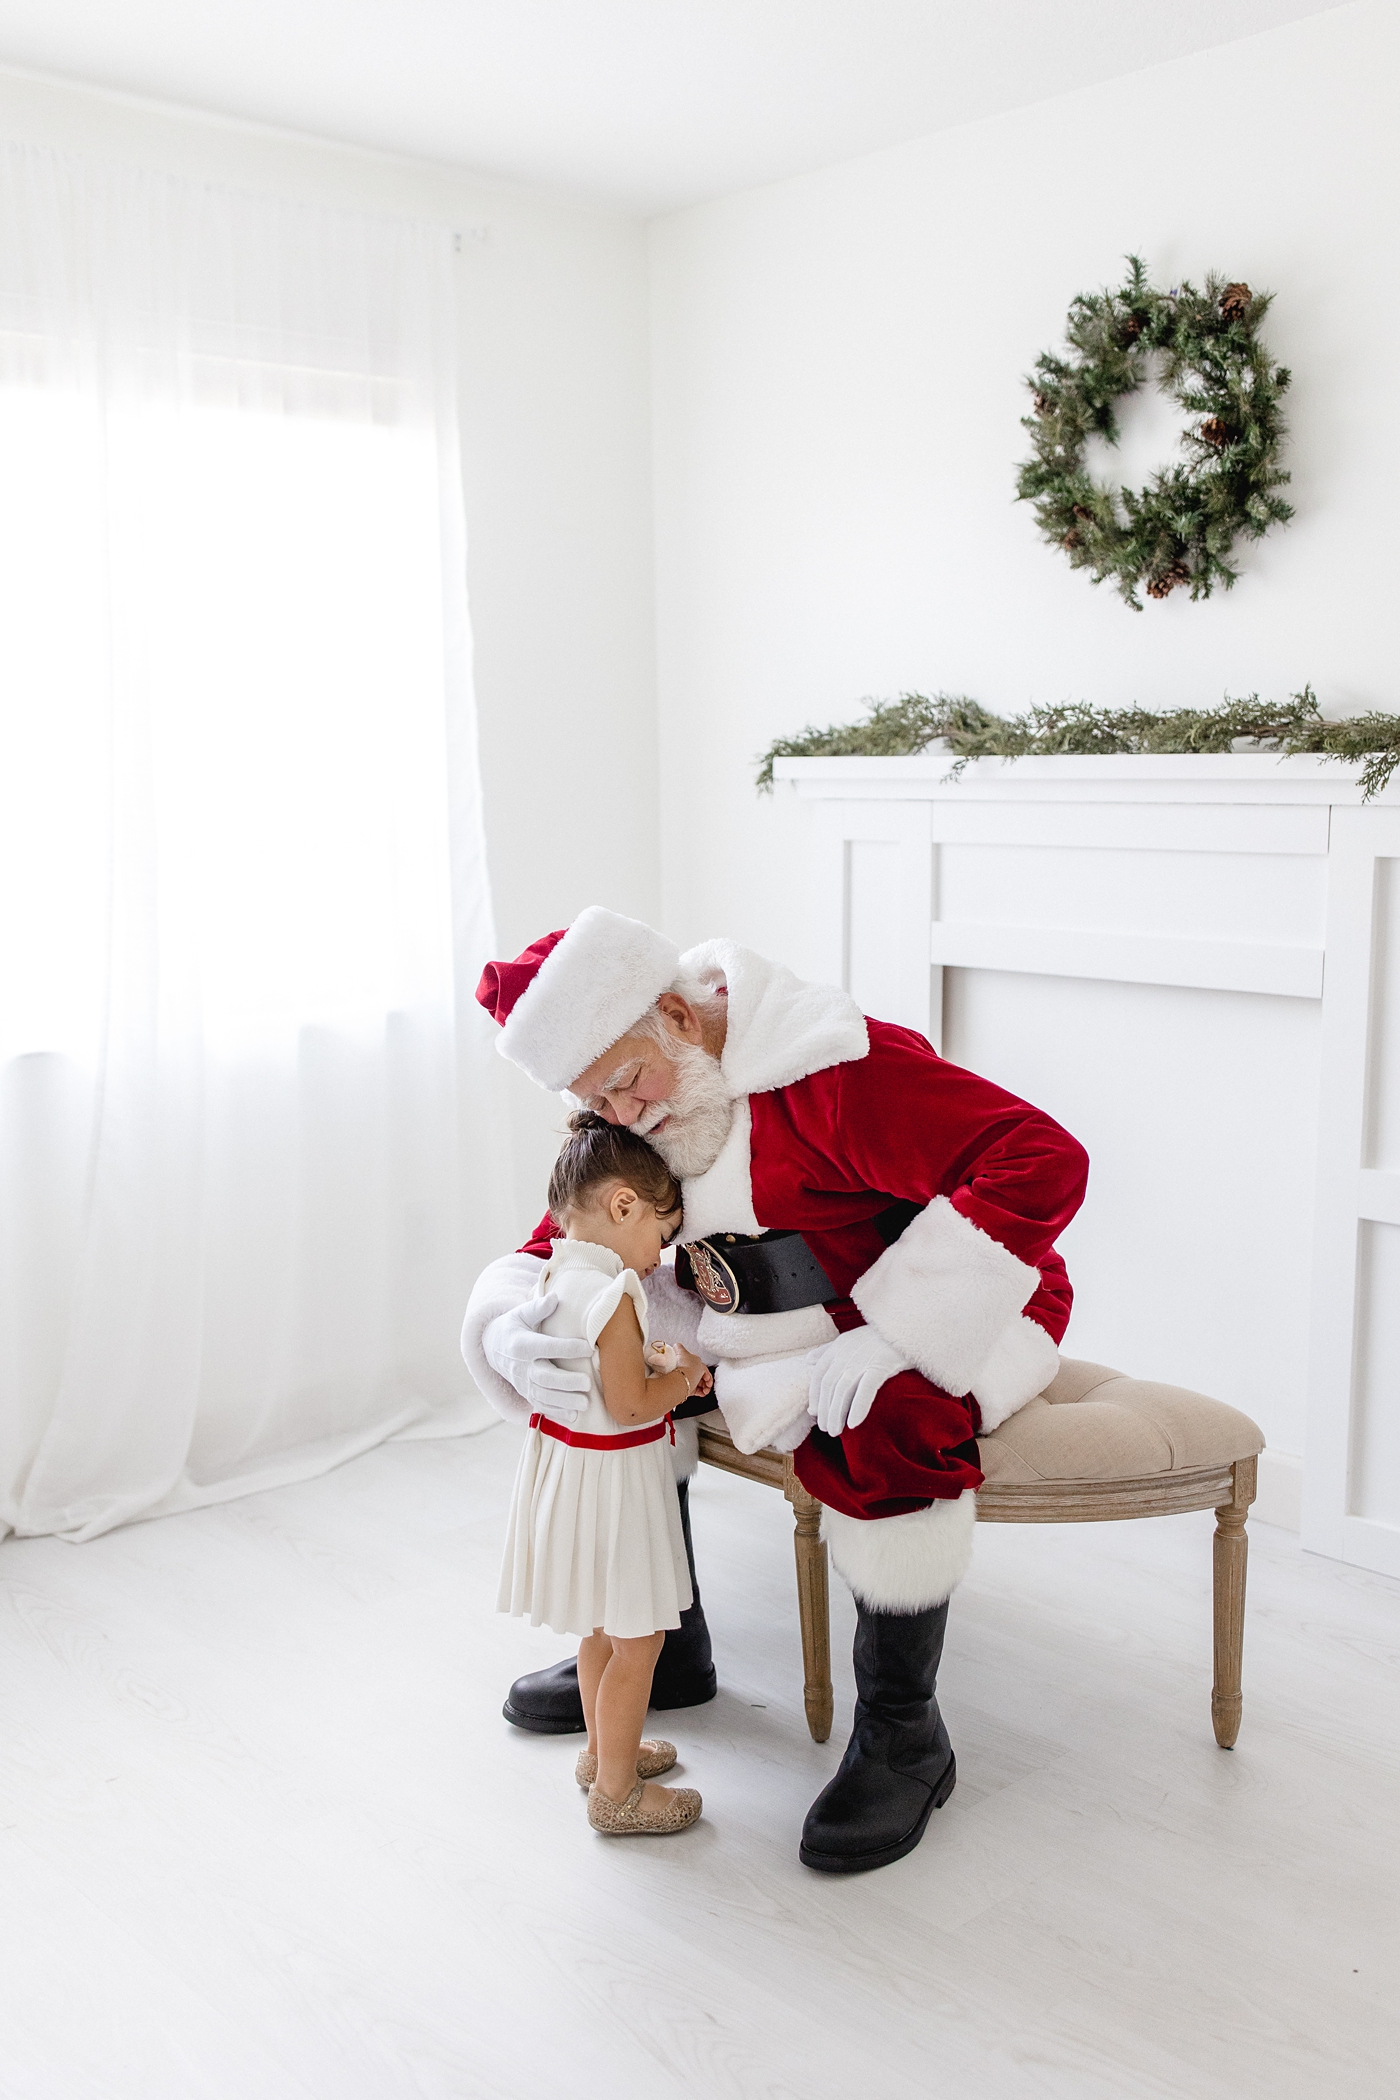 Little girl hugs Santa Claus during Miami studio session. Photo by Ivanna Vidal Photography.